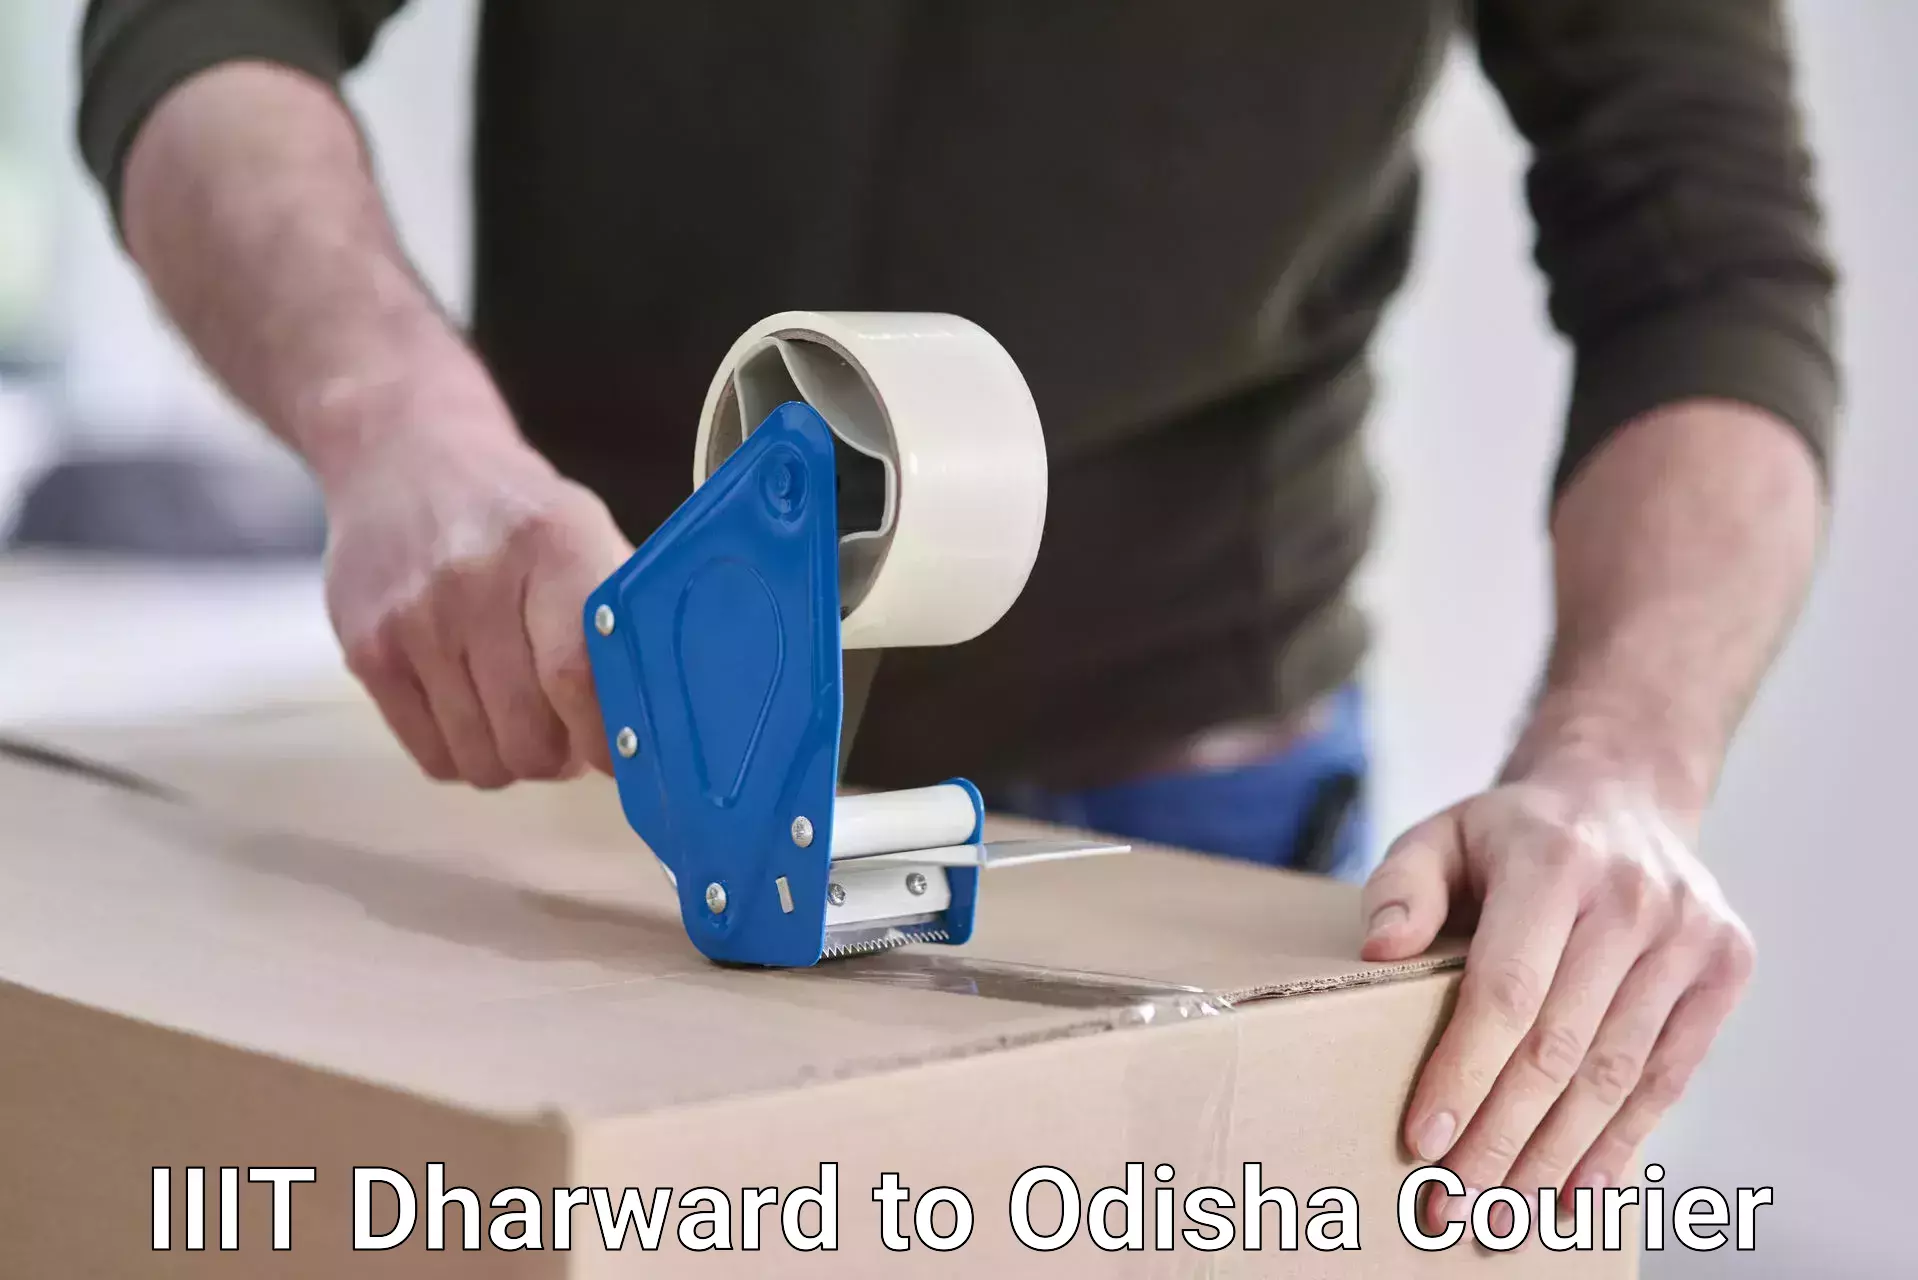 Professional courier services IIIT Dharward to Odisha